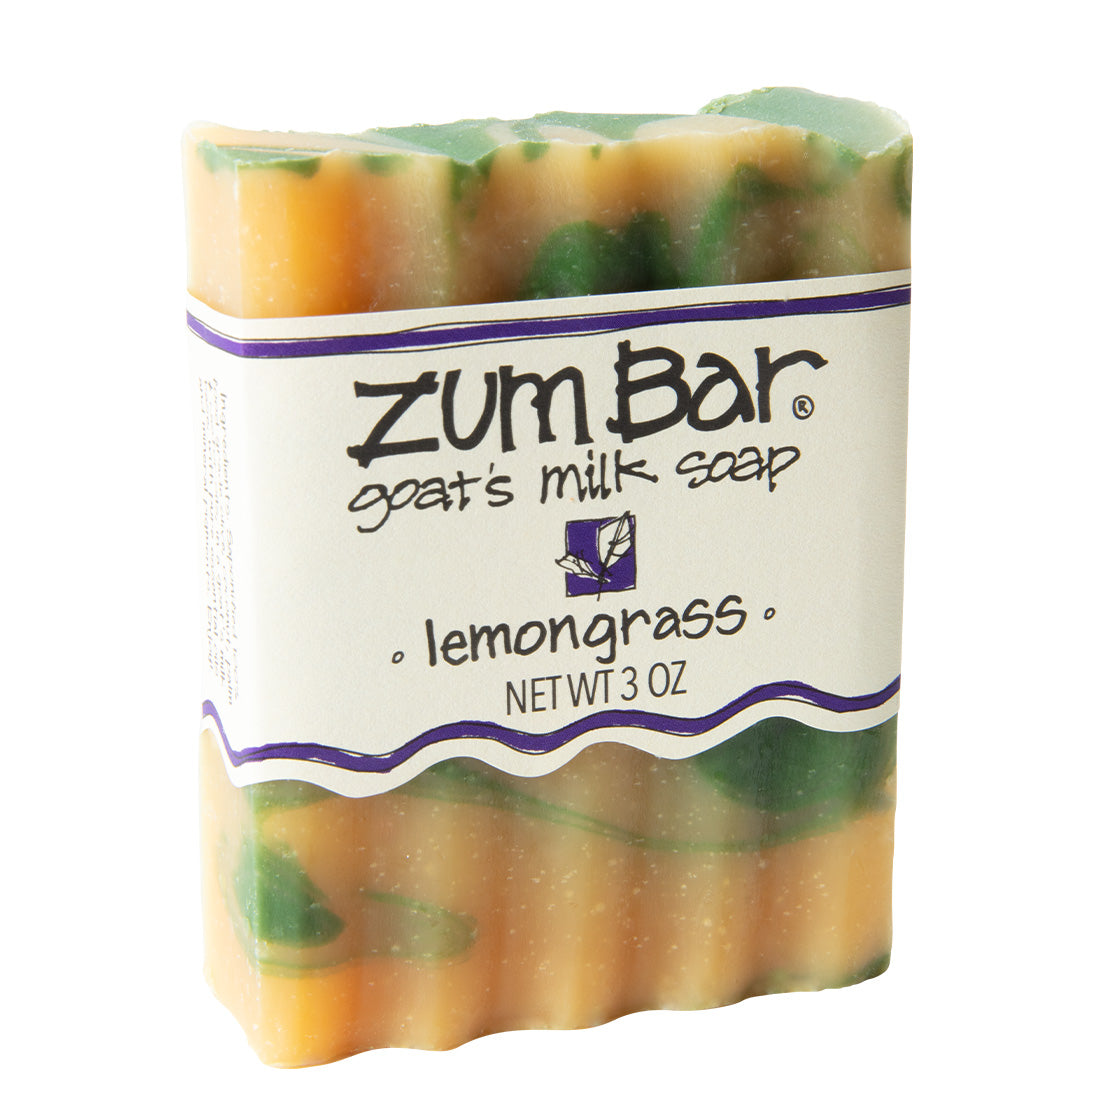 Labeled lemongrass cented Zum Bar Soap with yellow and green colored swirls.